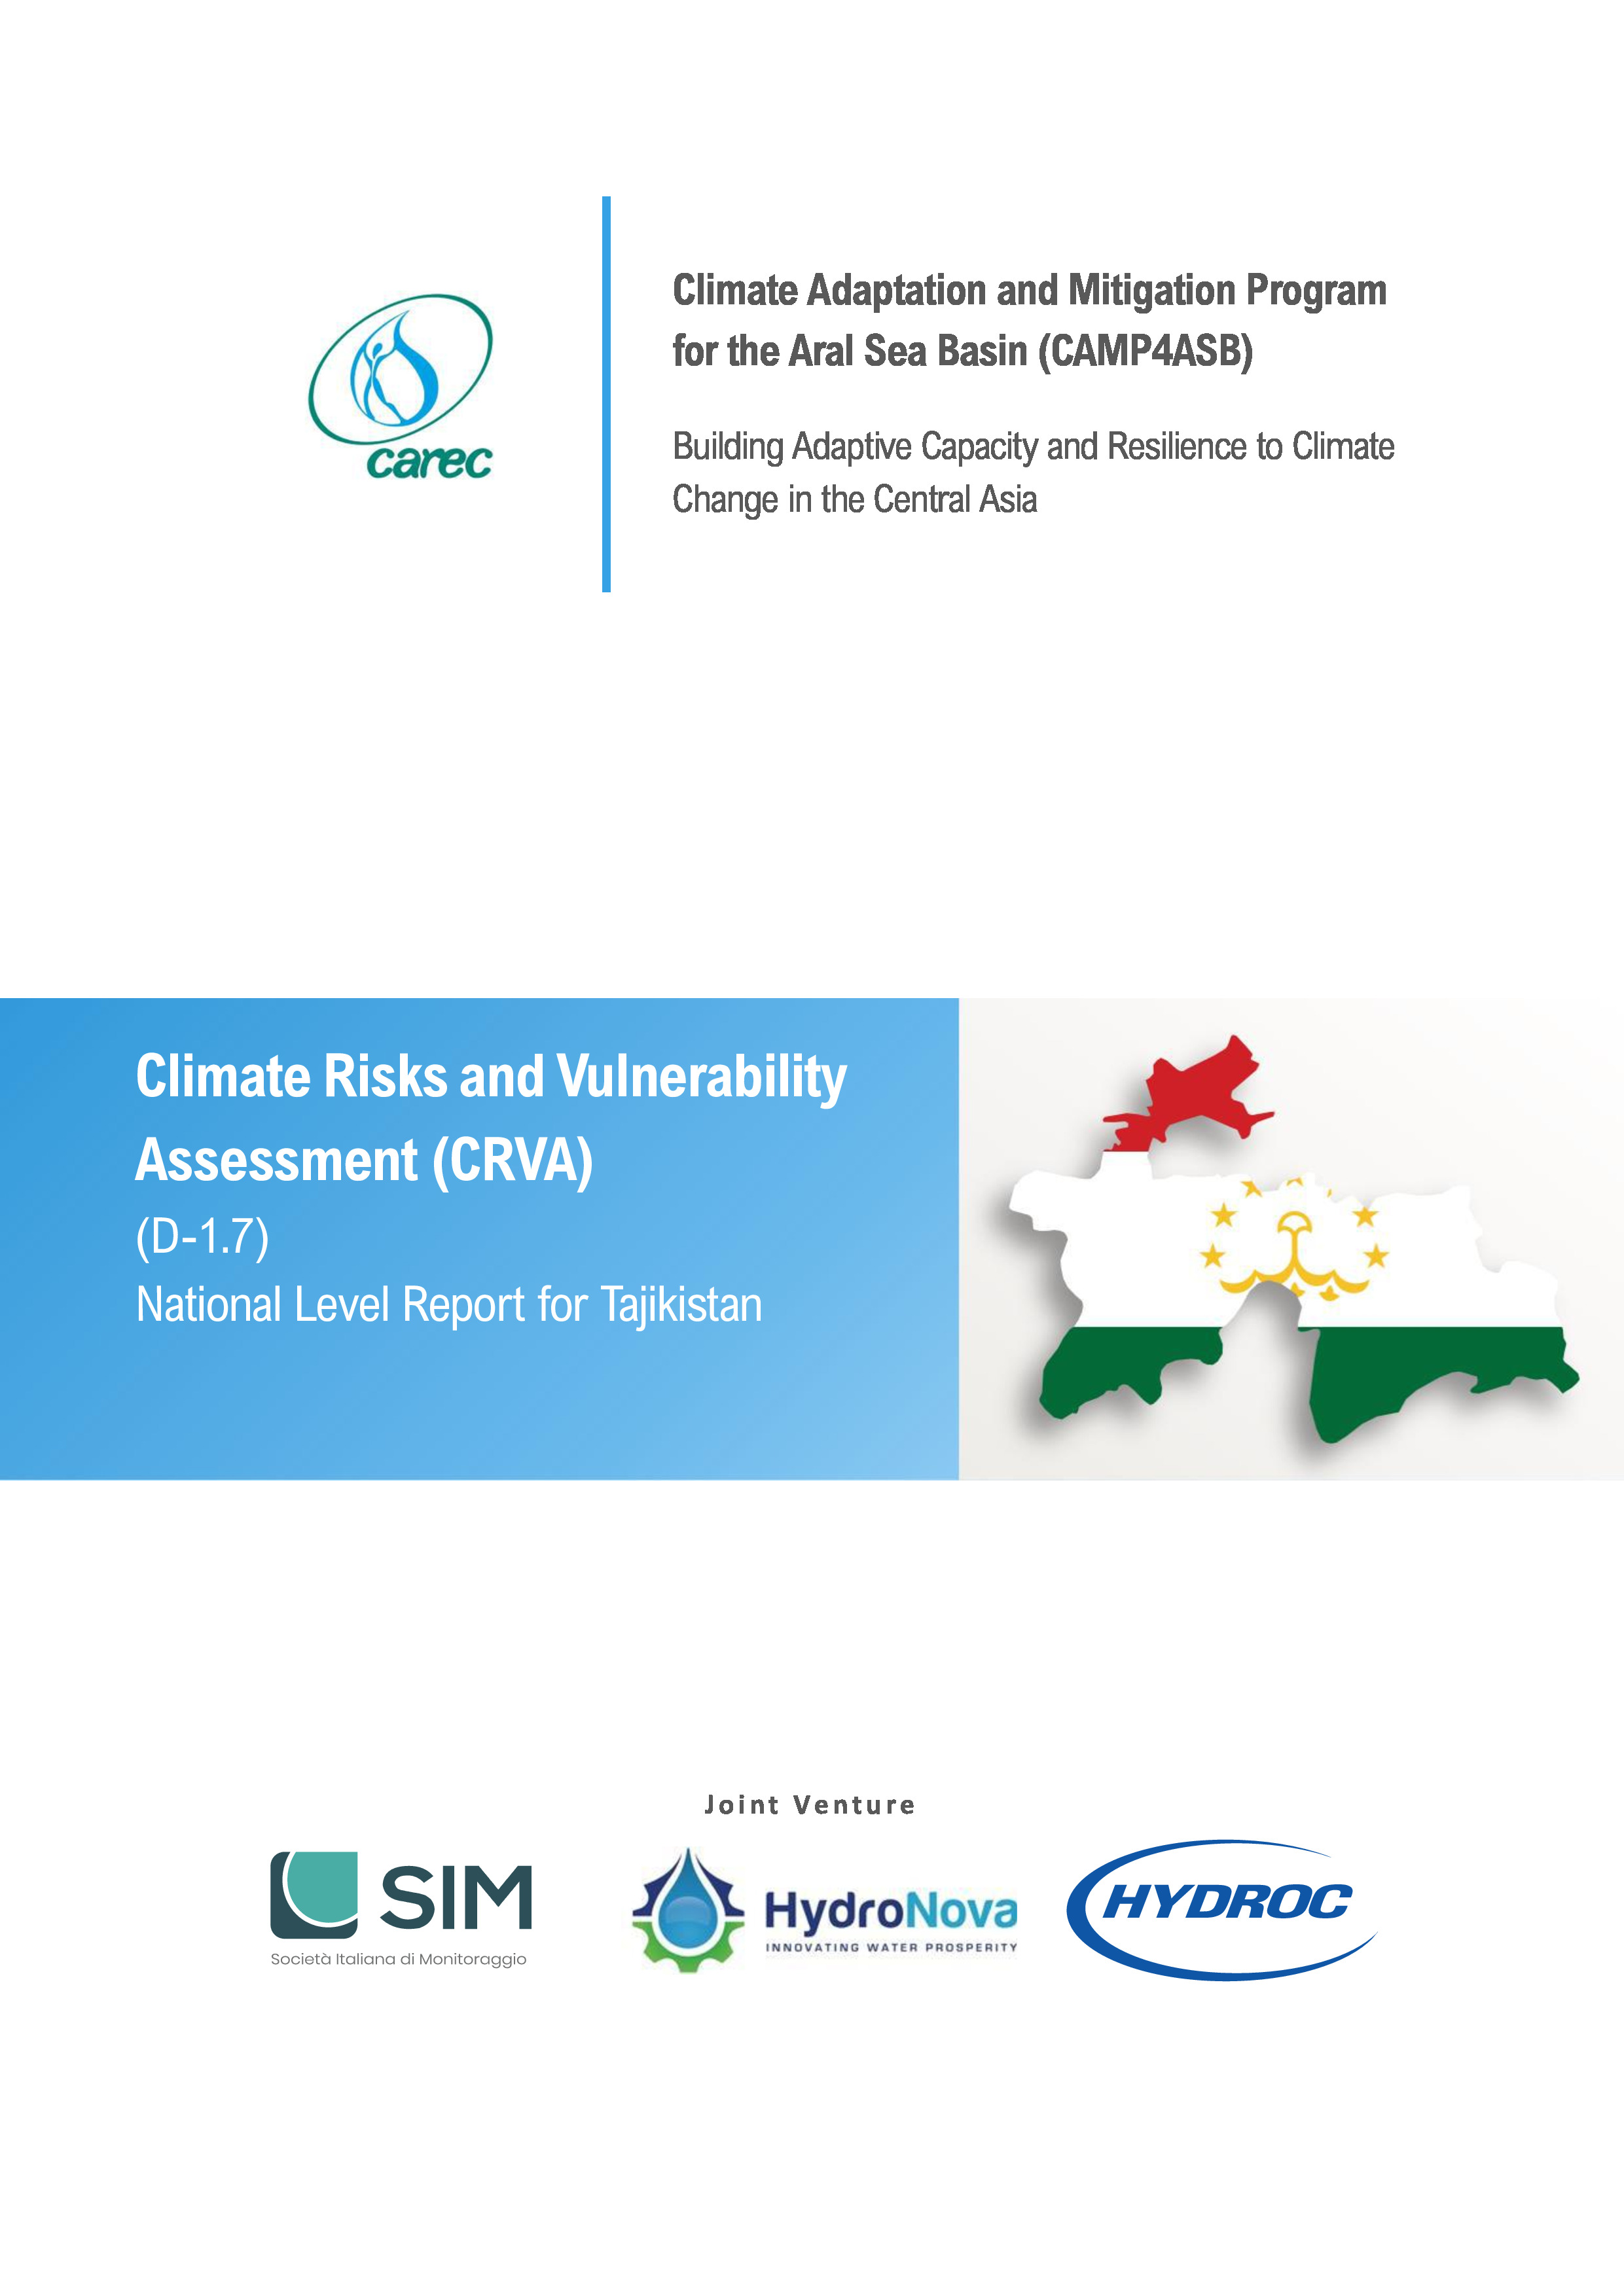 Climate Risks and Vulnerability Assessment (CRVA) (D-1.7) National Level Report for Tajikistan, 2021